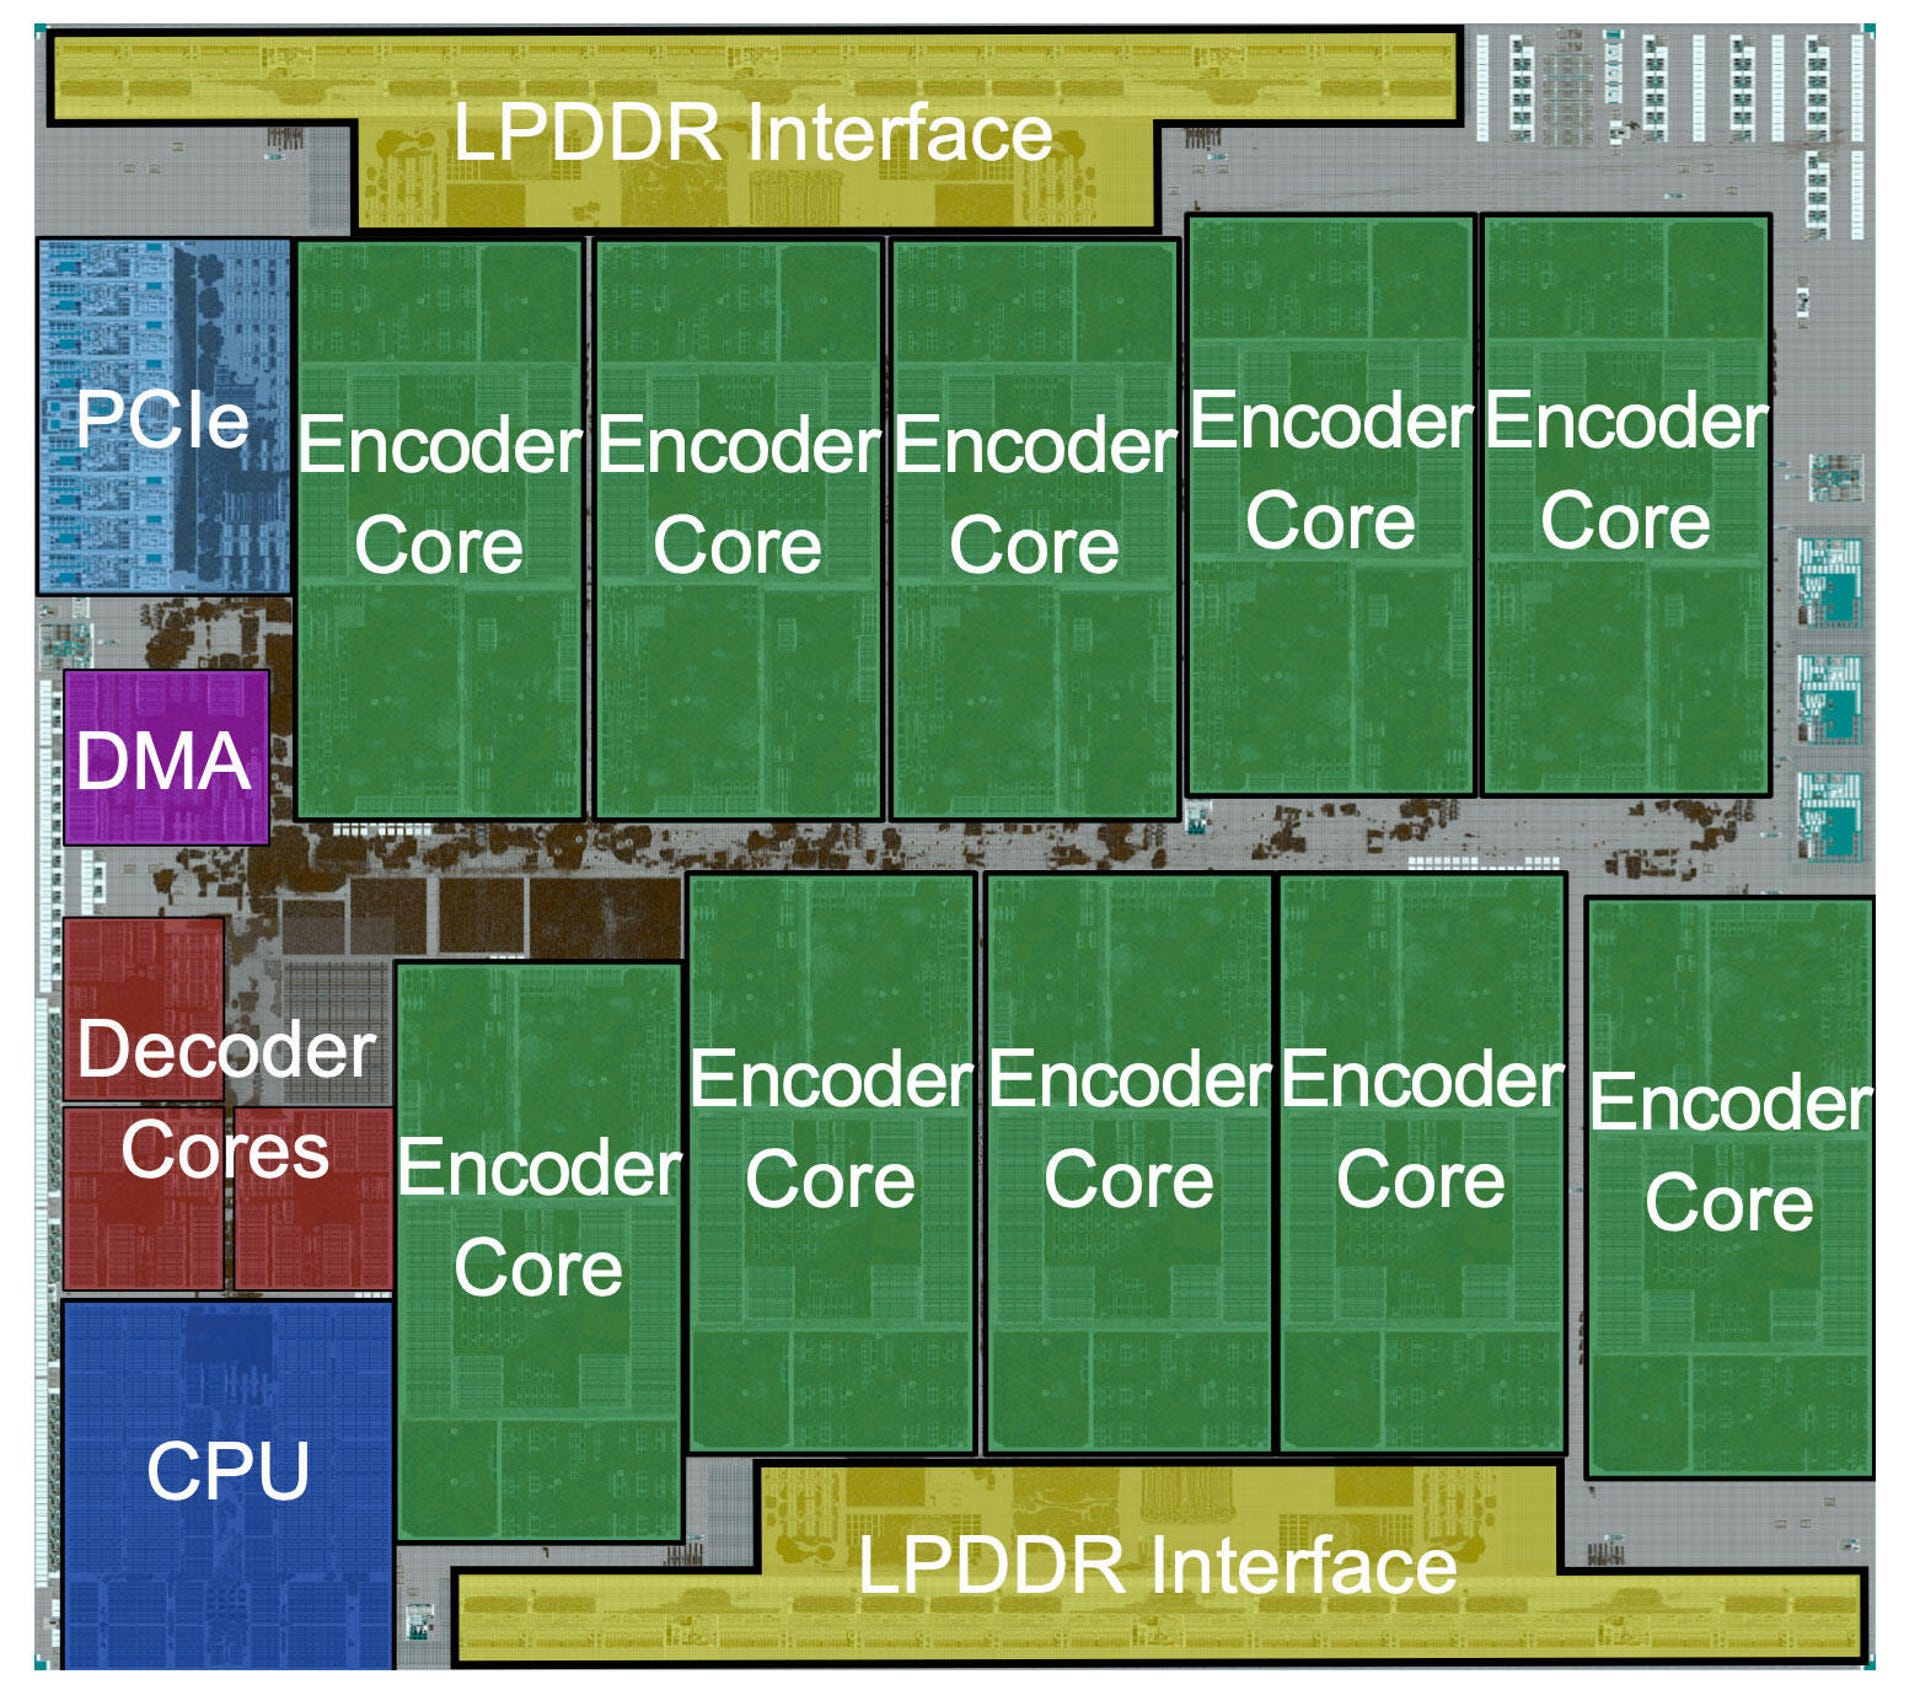 Google designed a chip called Argos to speed video processing at YouTube. Here's the chip's layout.